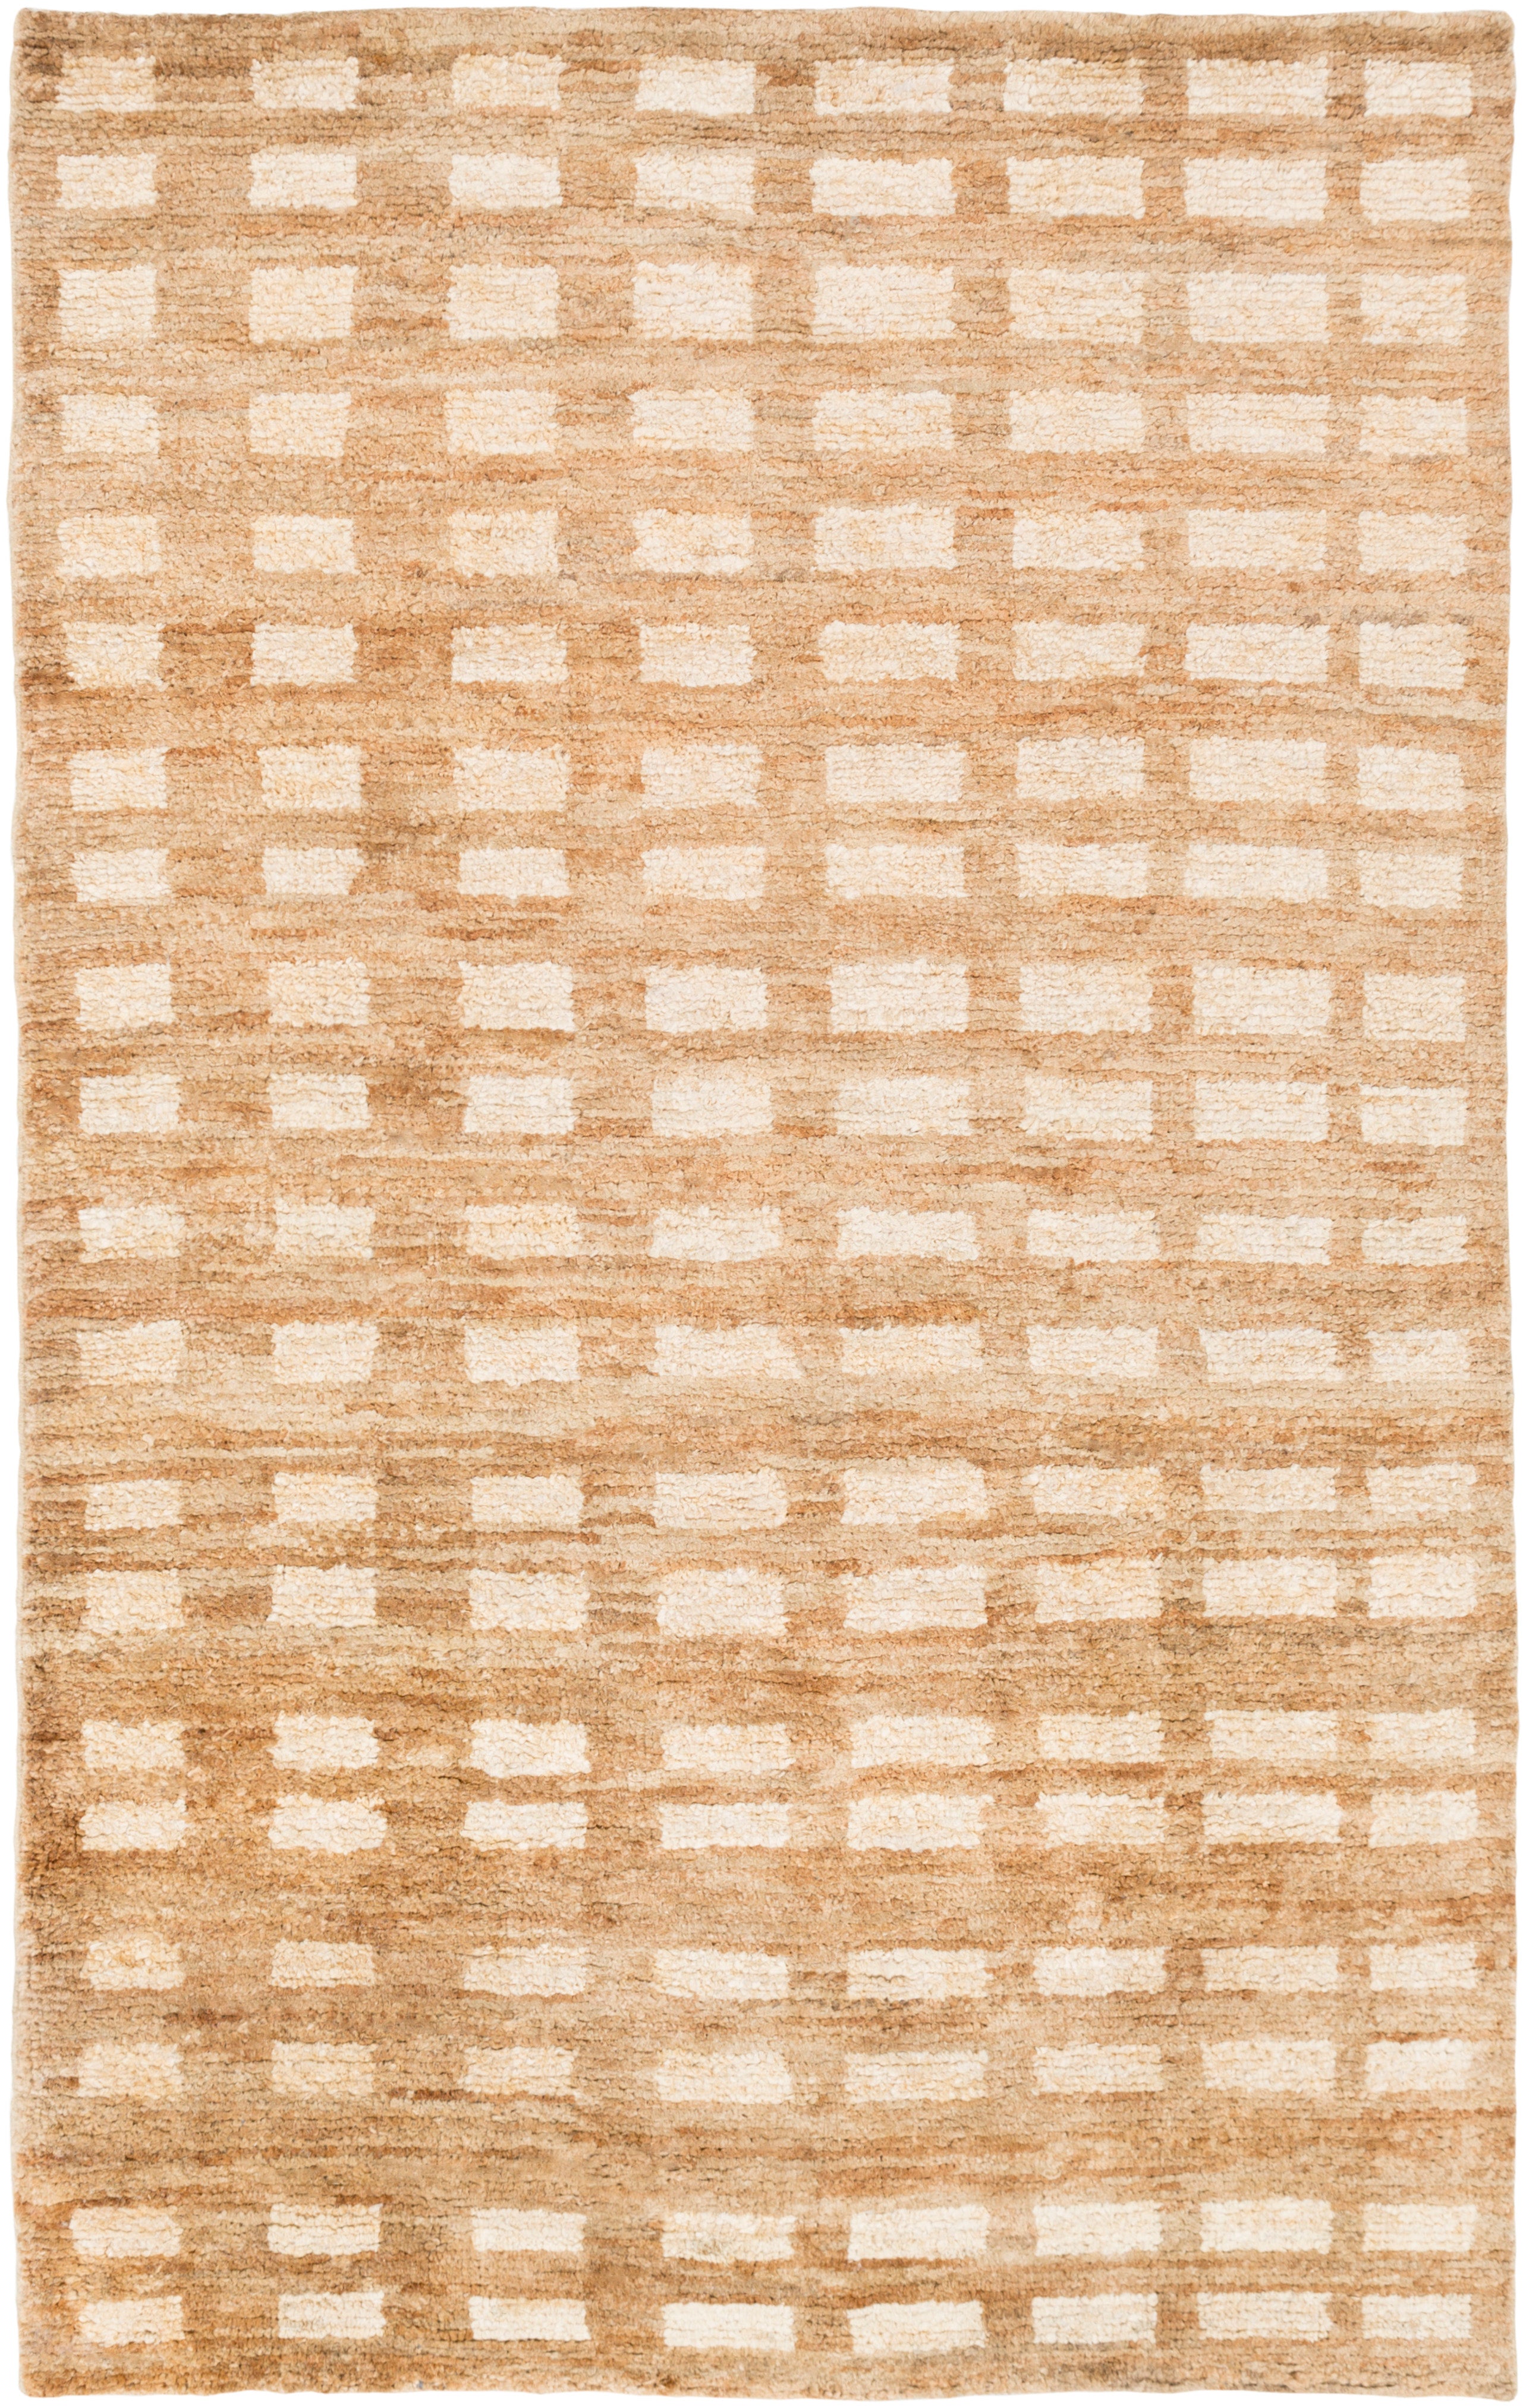 Surya Tangier TNG3001 Brown/Neutral Area Rug